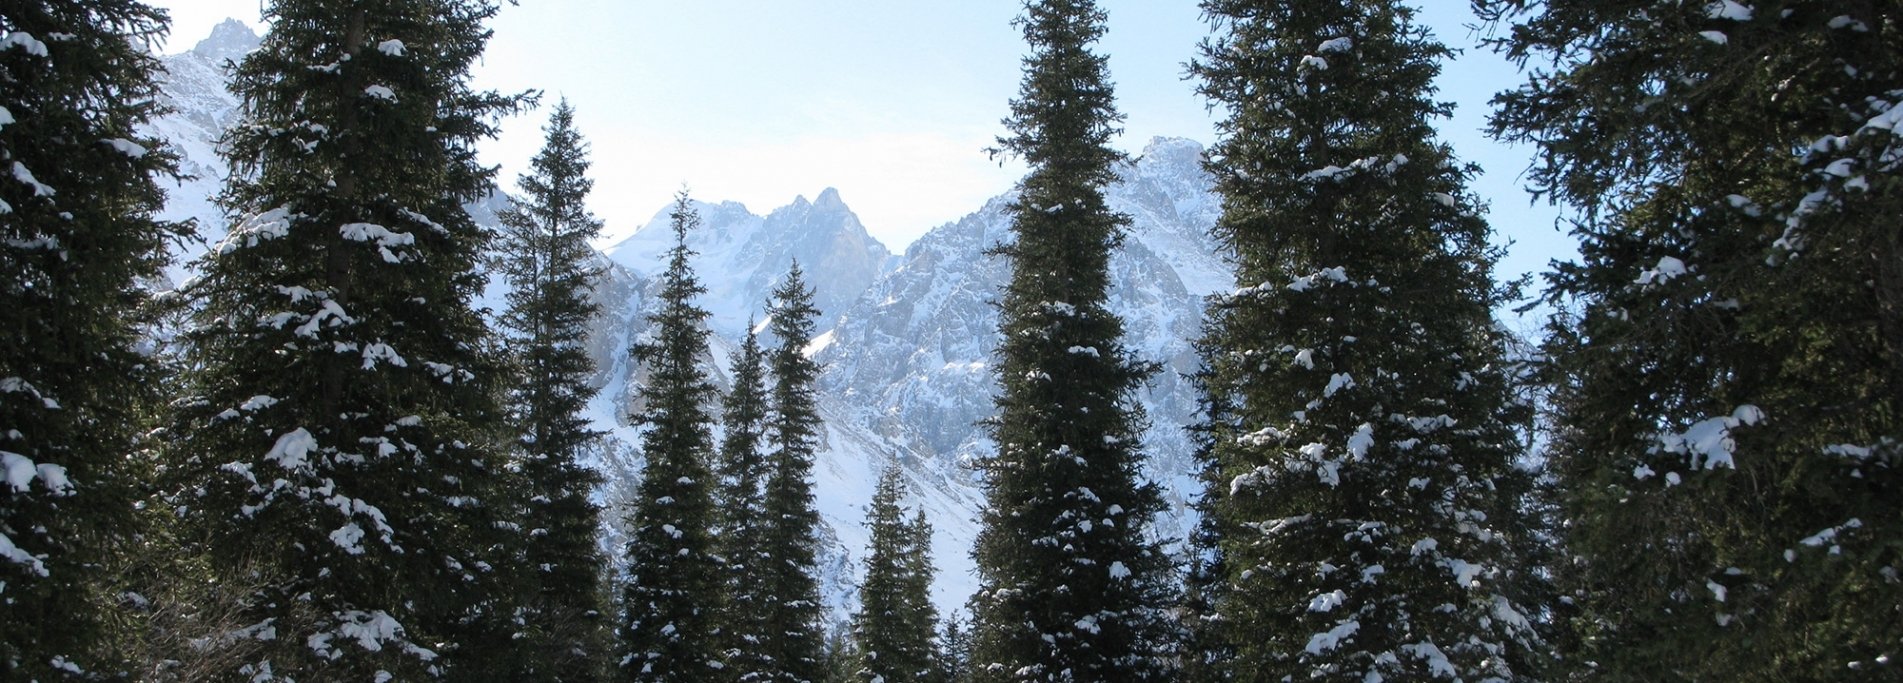 Winter roads of Kyrgyzstan - Self-drive along the snow-covered Tien-Shan Mountains